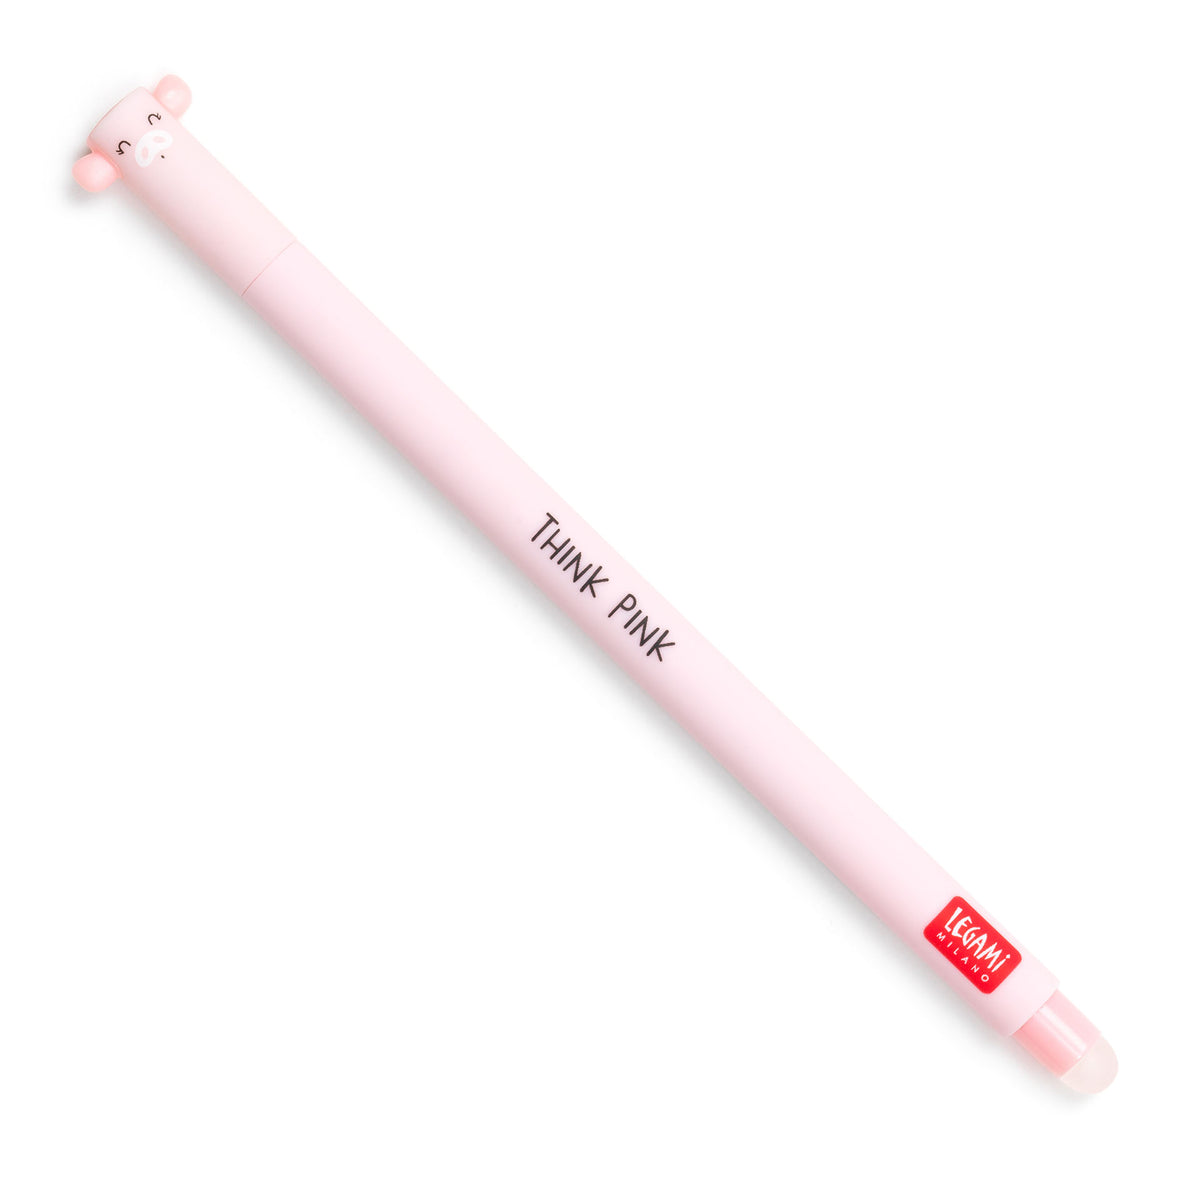 An image of a pink coloured erasable pen by Legami. The cap of the pen is like the head of a pig with piggy ears formed on the sides. It has an erasable ball at the other end of the pen.